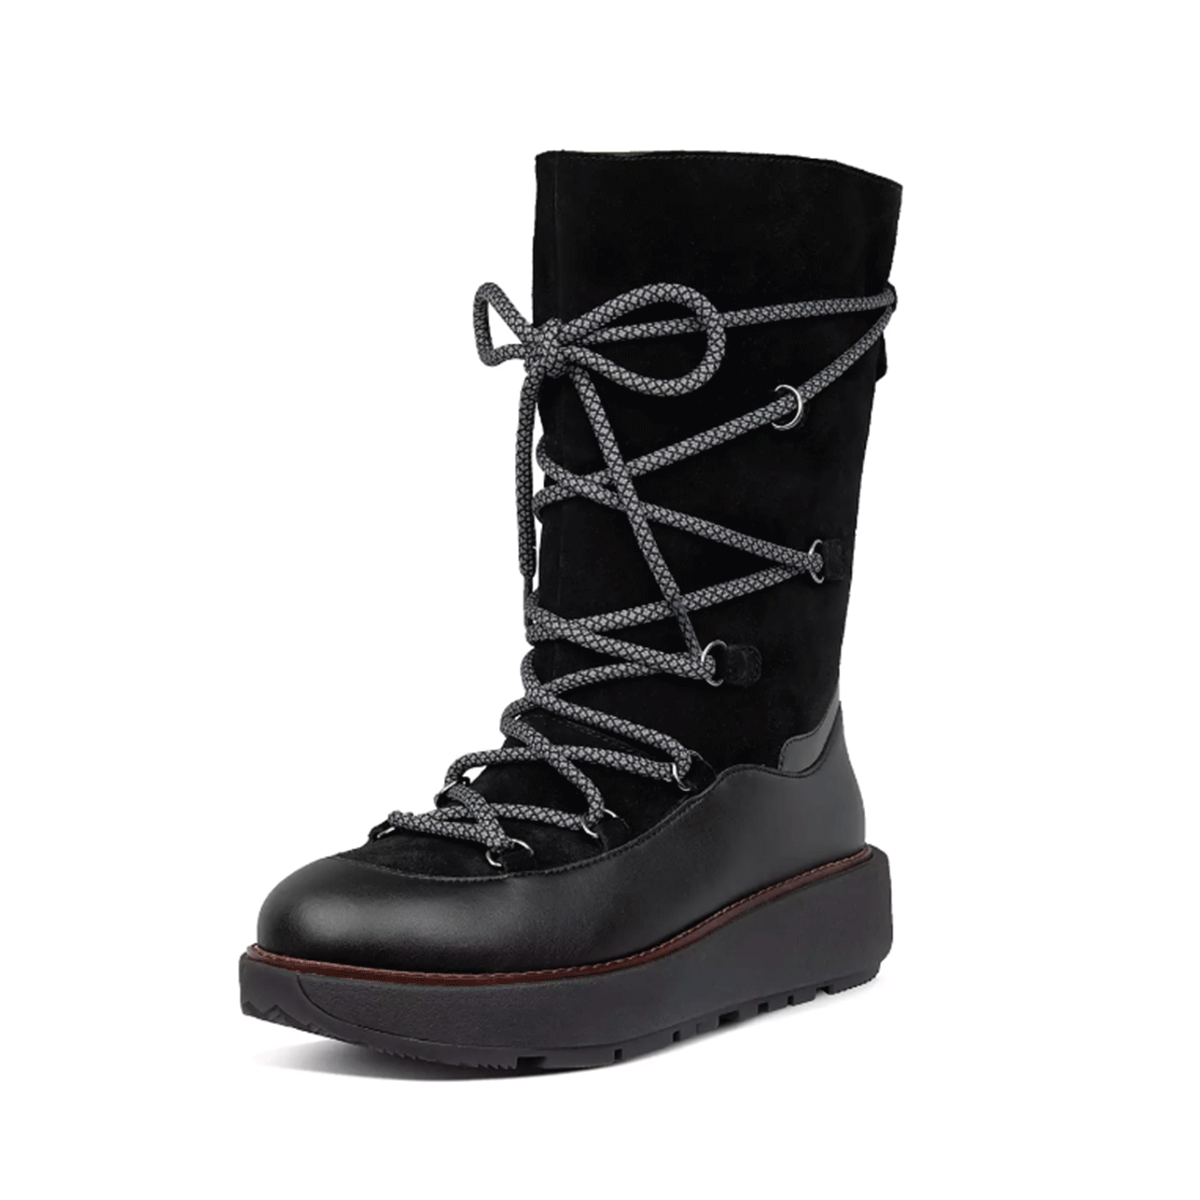 boots-for-winter-283422-1572982991645-main